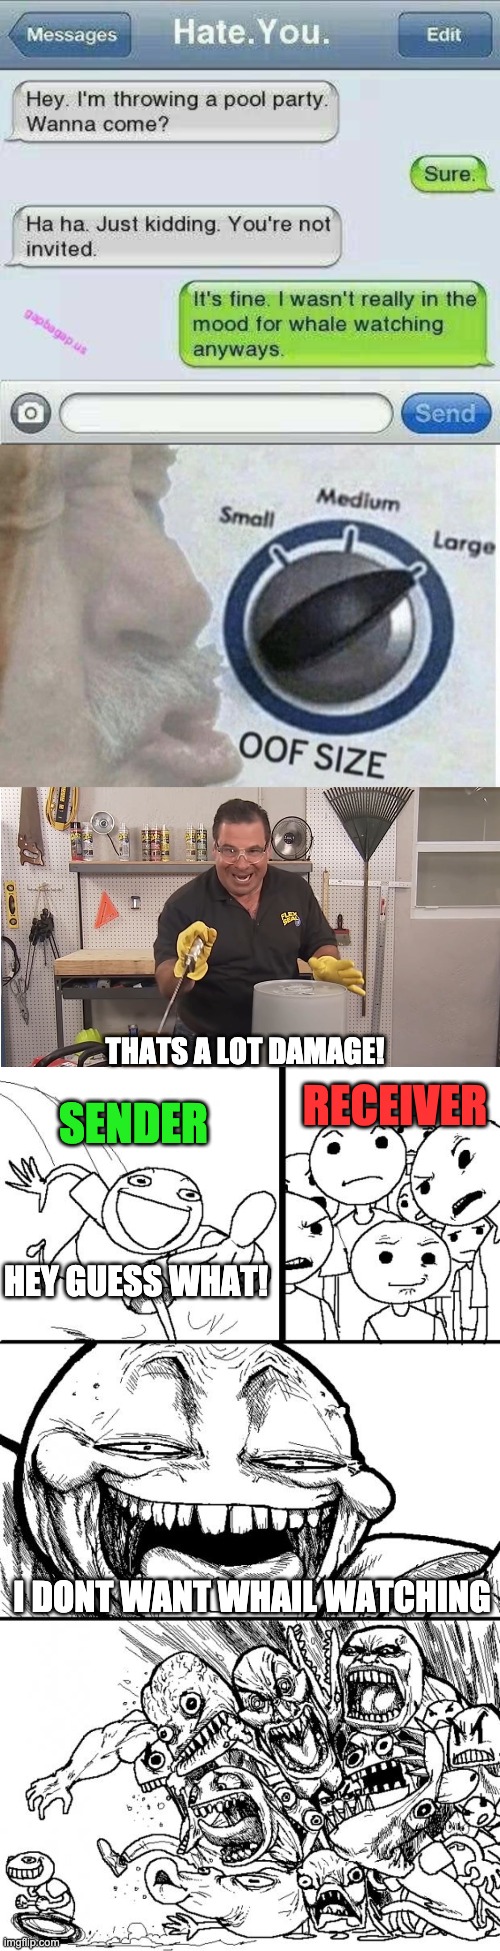 I found this text roast and decided to make it more funnier! | THATS A LOT DAMAGE! RECEIVER; SENDER; HEY GUESS WHAT! I DONT WANT WHAIL WATCHING | image tagged in memes,hey internet,phil swift that's a lotta damage flex tape/seal,oof size large | made w/ Imgflip meme maker